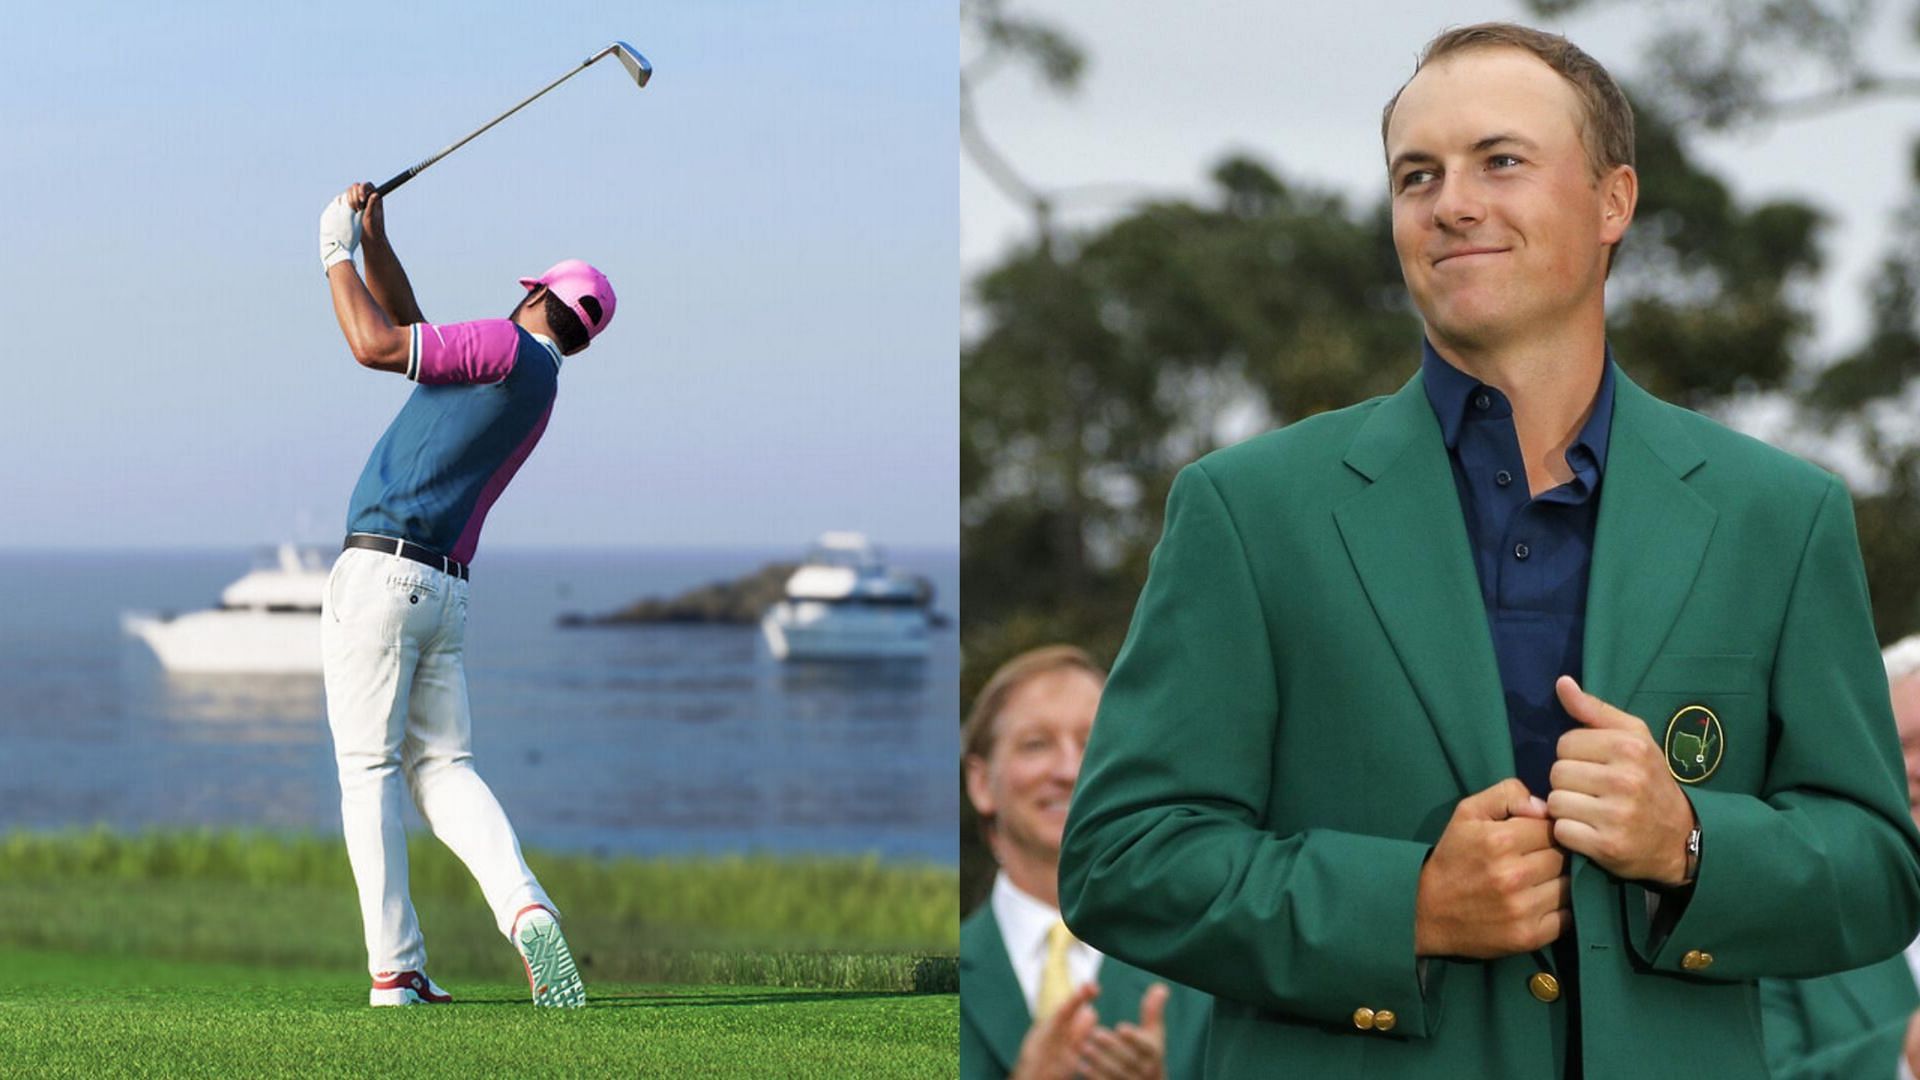 Golfer Jordan Spieth is rumored to be included in the game (Images via EA, Getty)